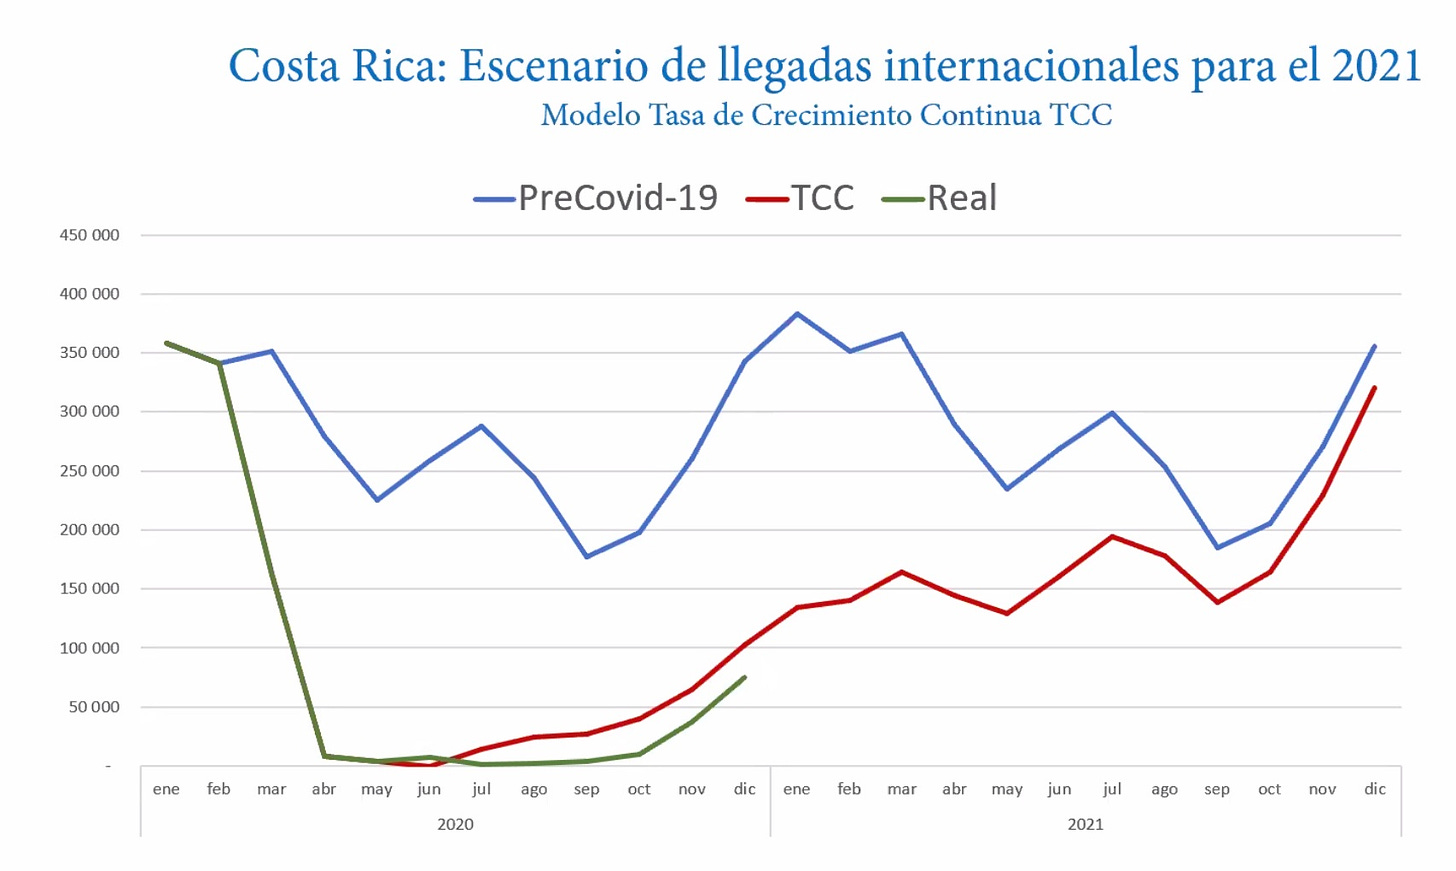 tourism growth in costa rica